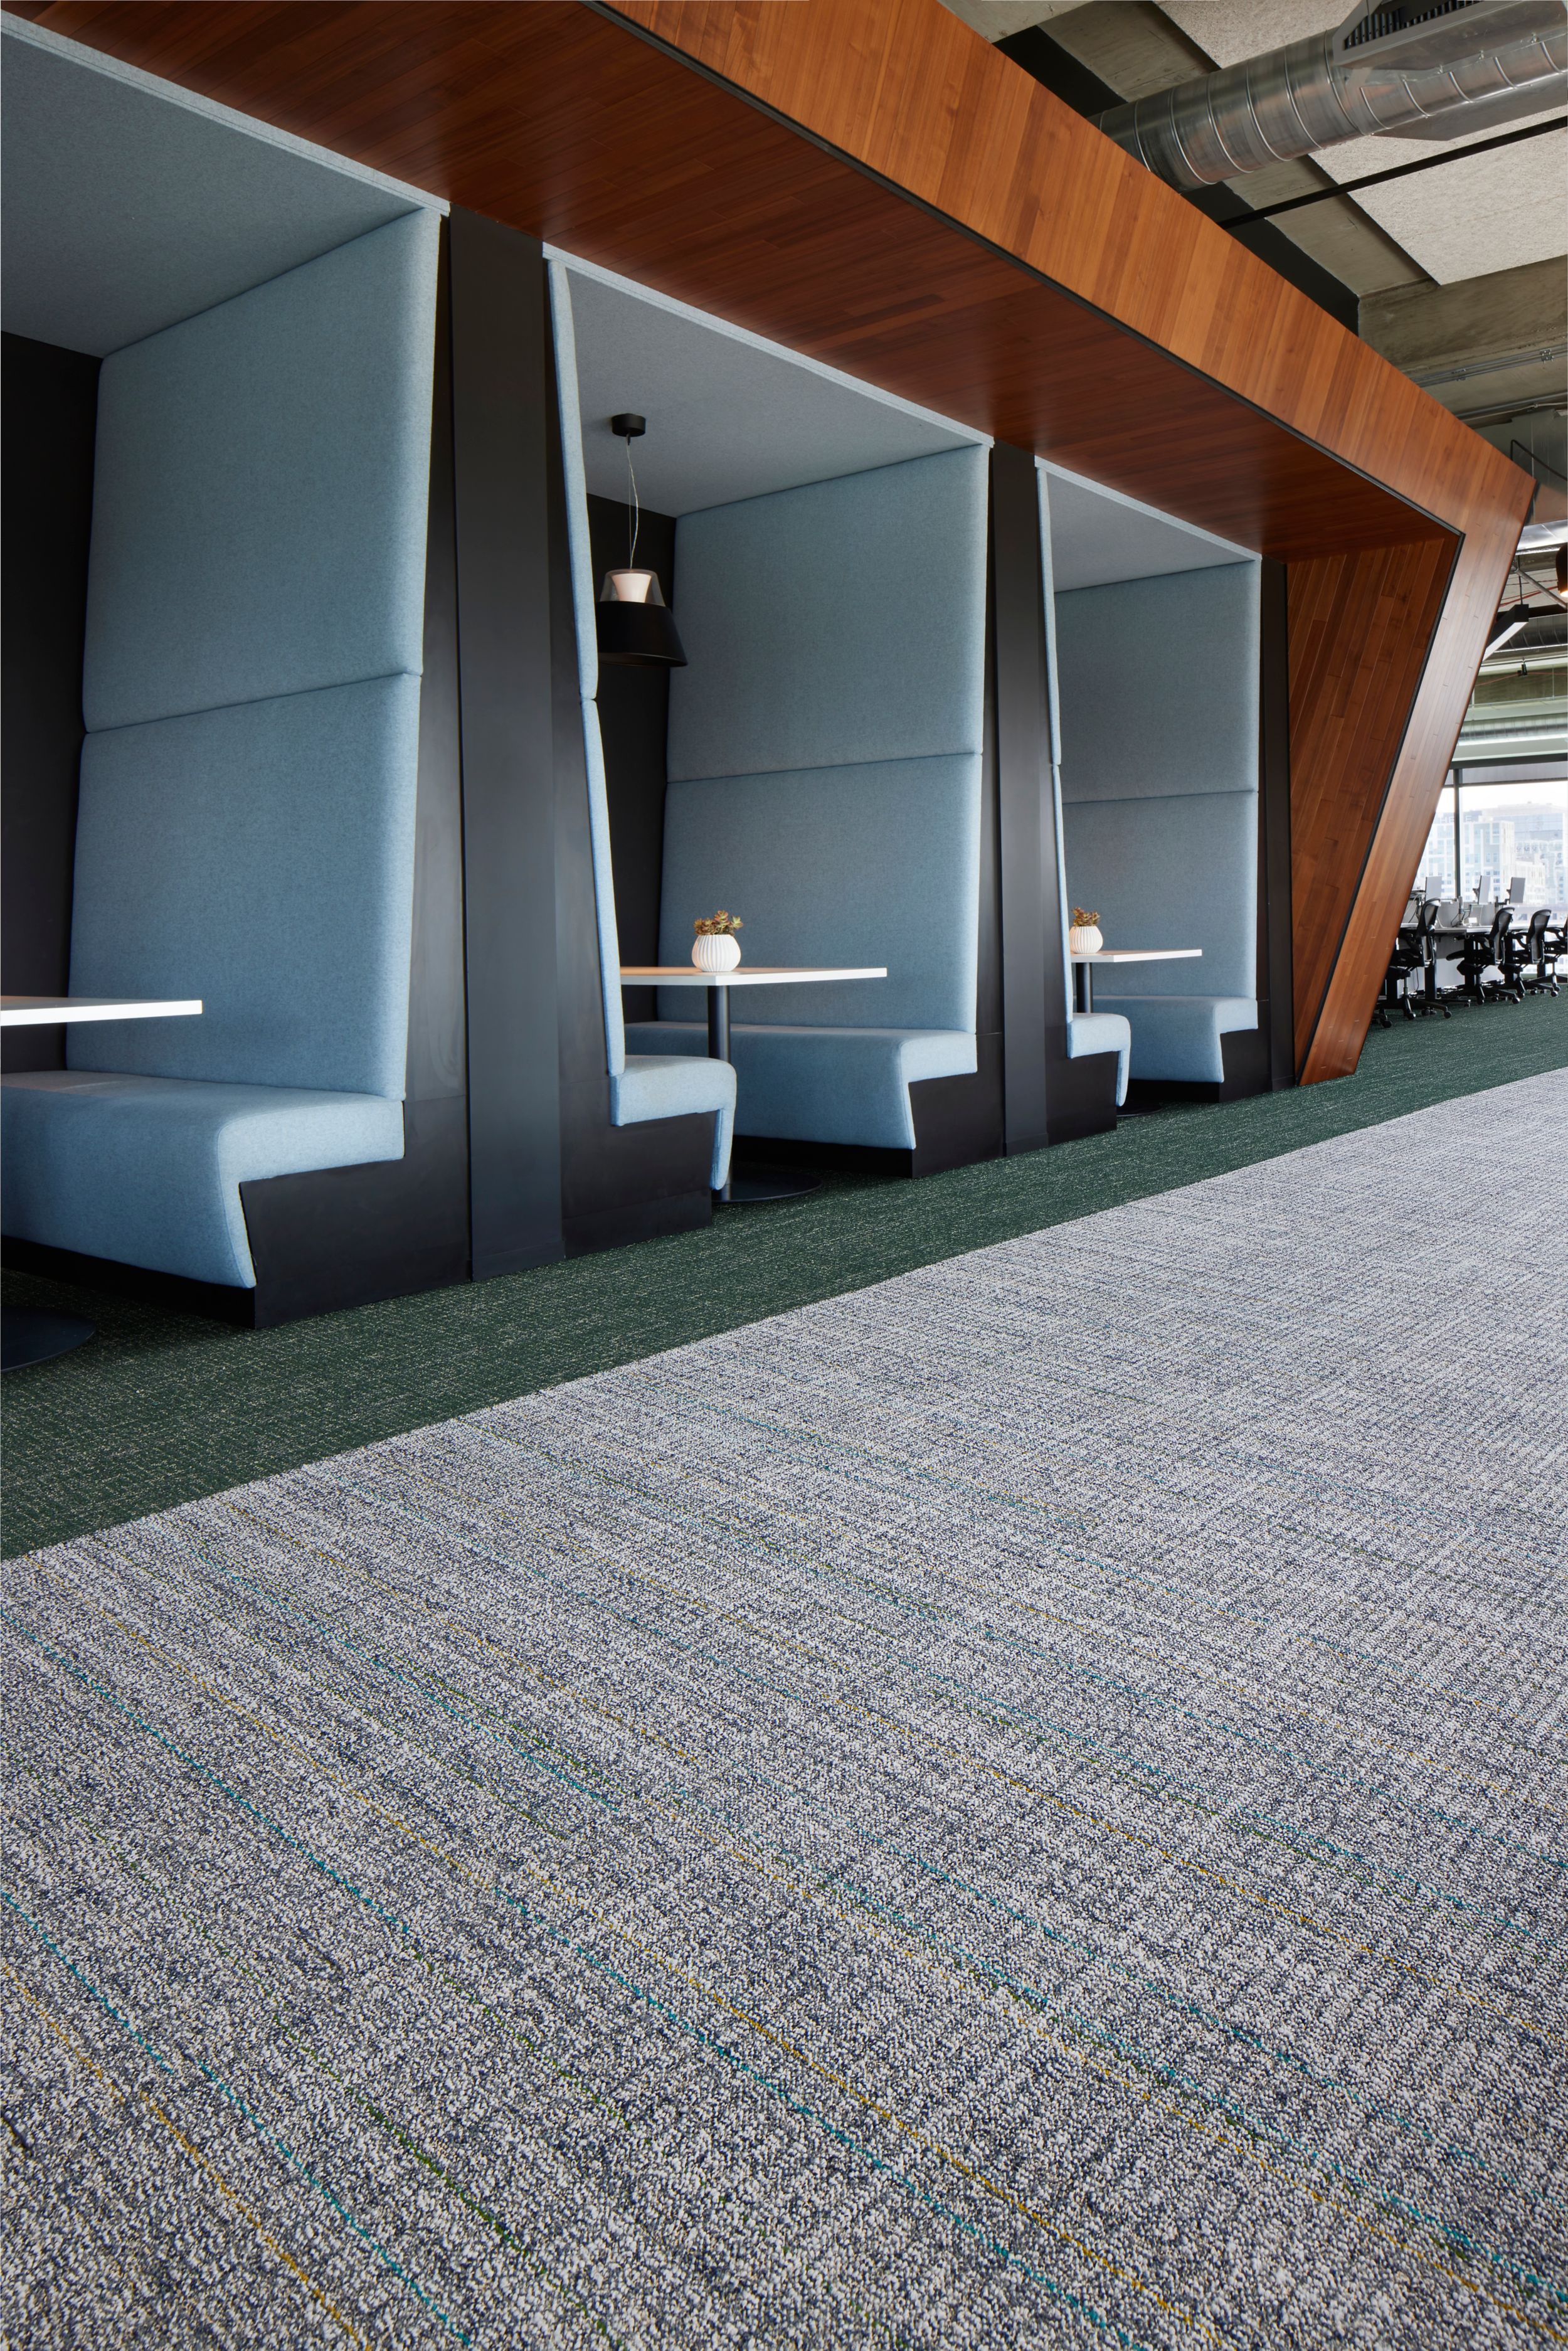 Interface Open Air 401 Stria and Open Ended plank carpet tile in office lobby numéro d’image 1